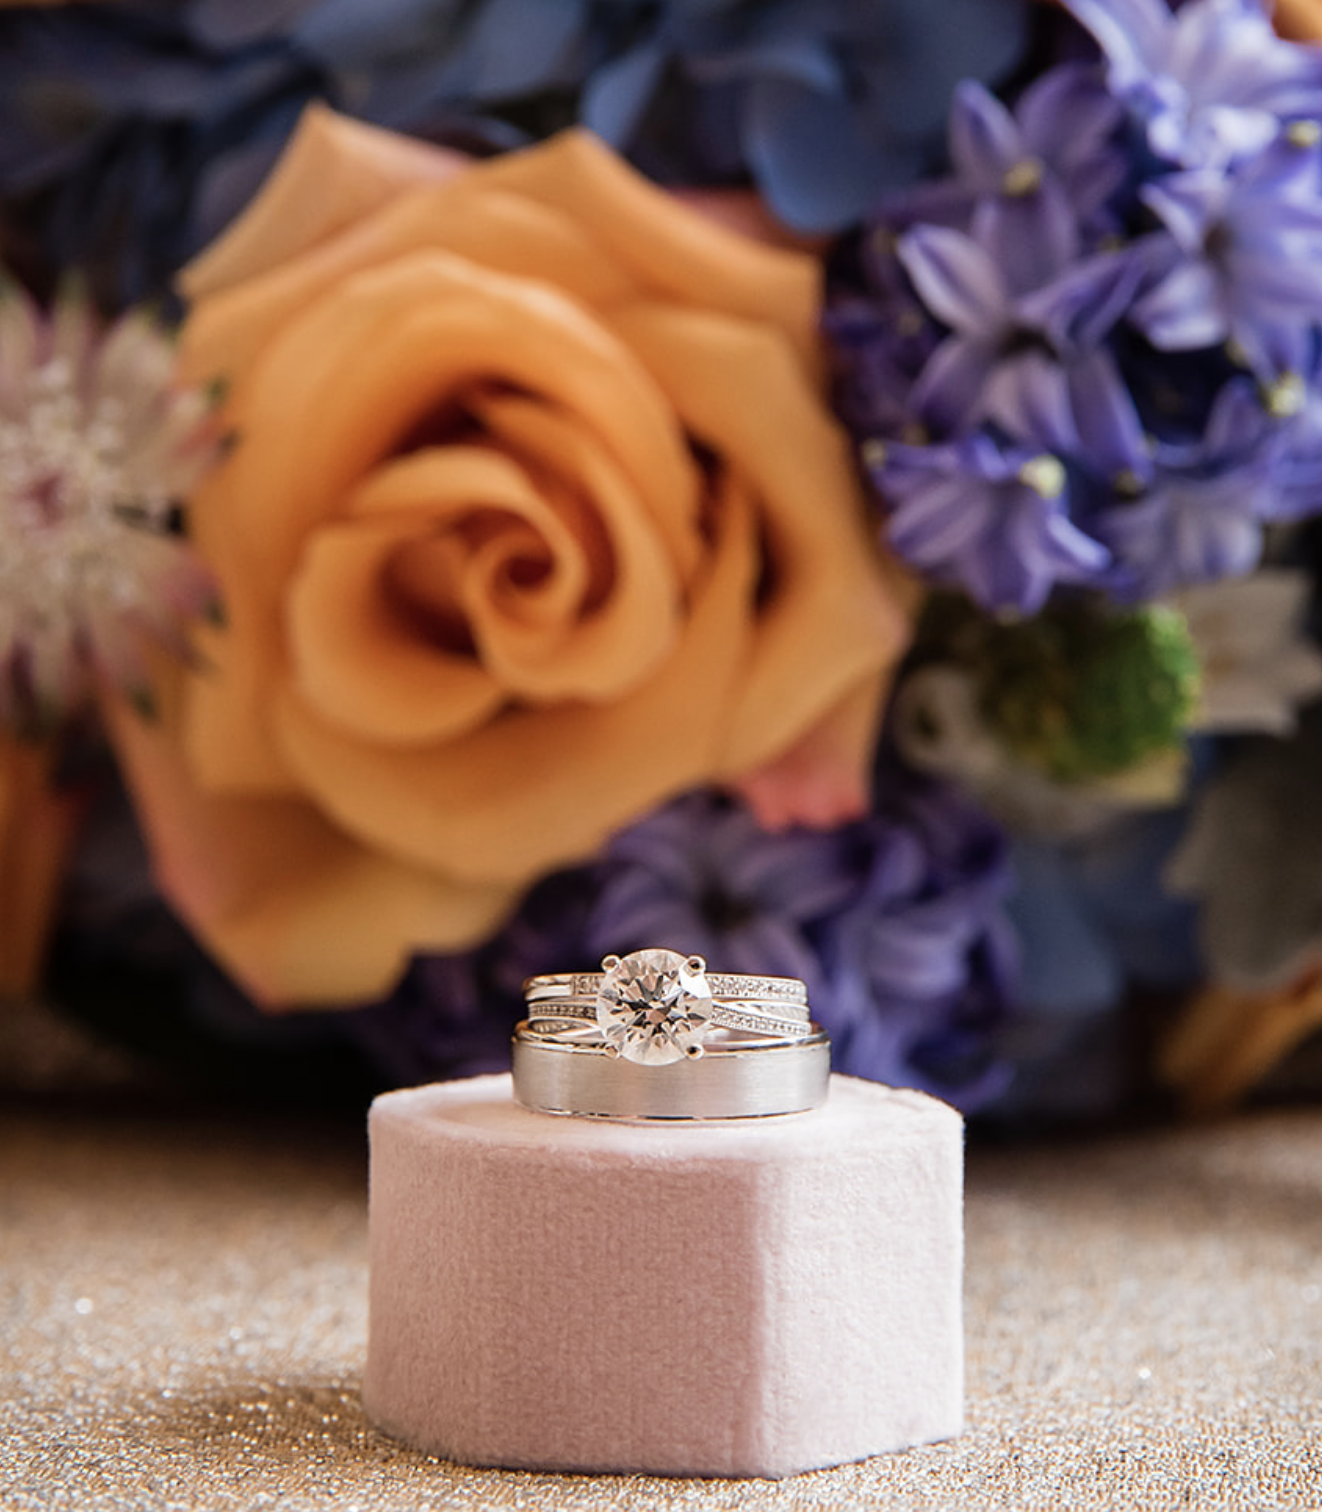 The bride's engagement ring with a background of orange and purple flowers for the whimsical jewel-toned wedding.